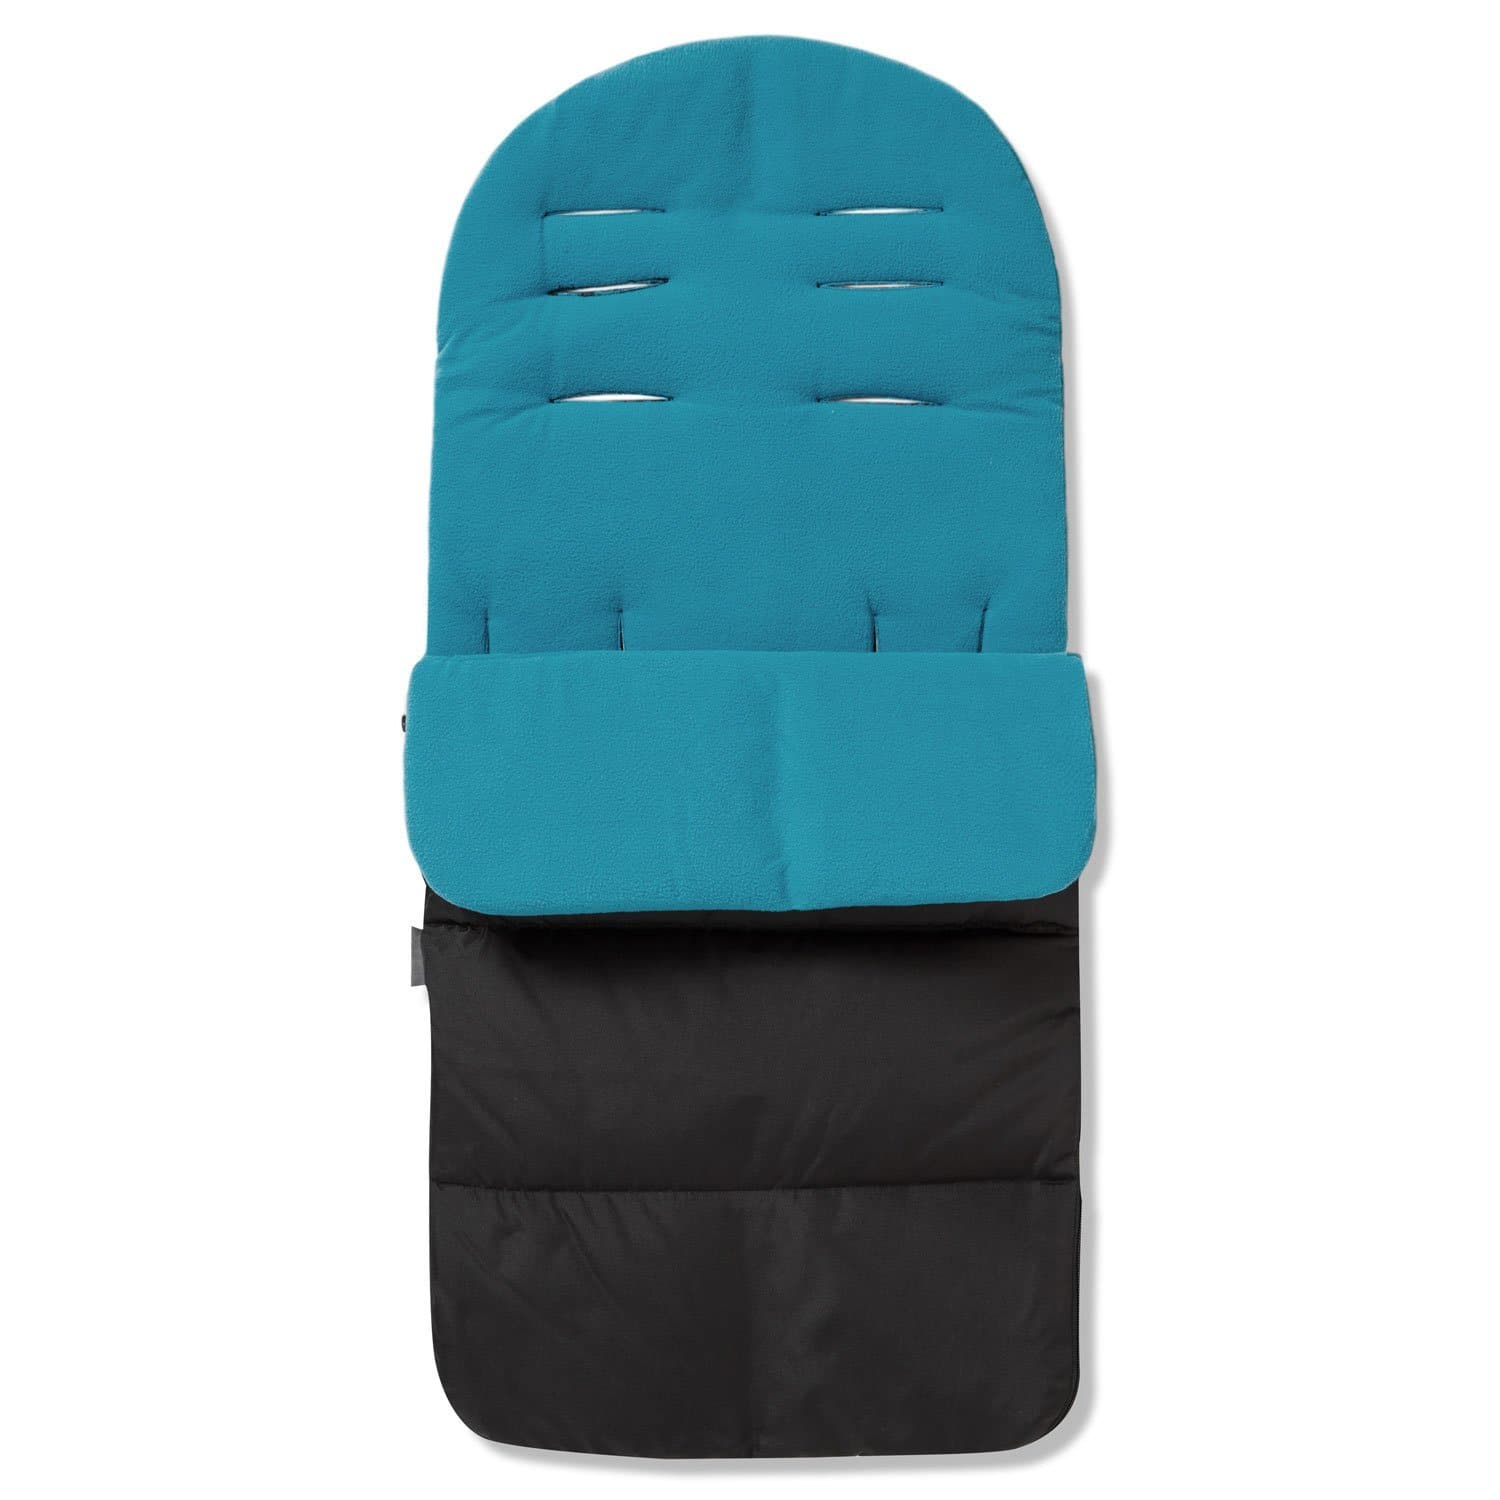 Premium Footmuff / Cosy Toes Compatible with Graco - Ocean Blue / Fits All Models | For Your Little One